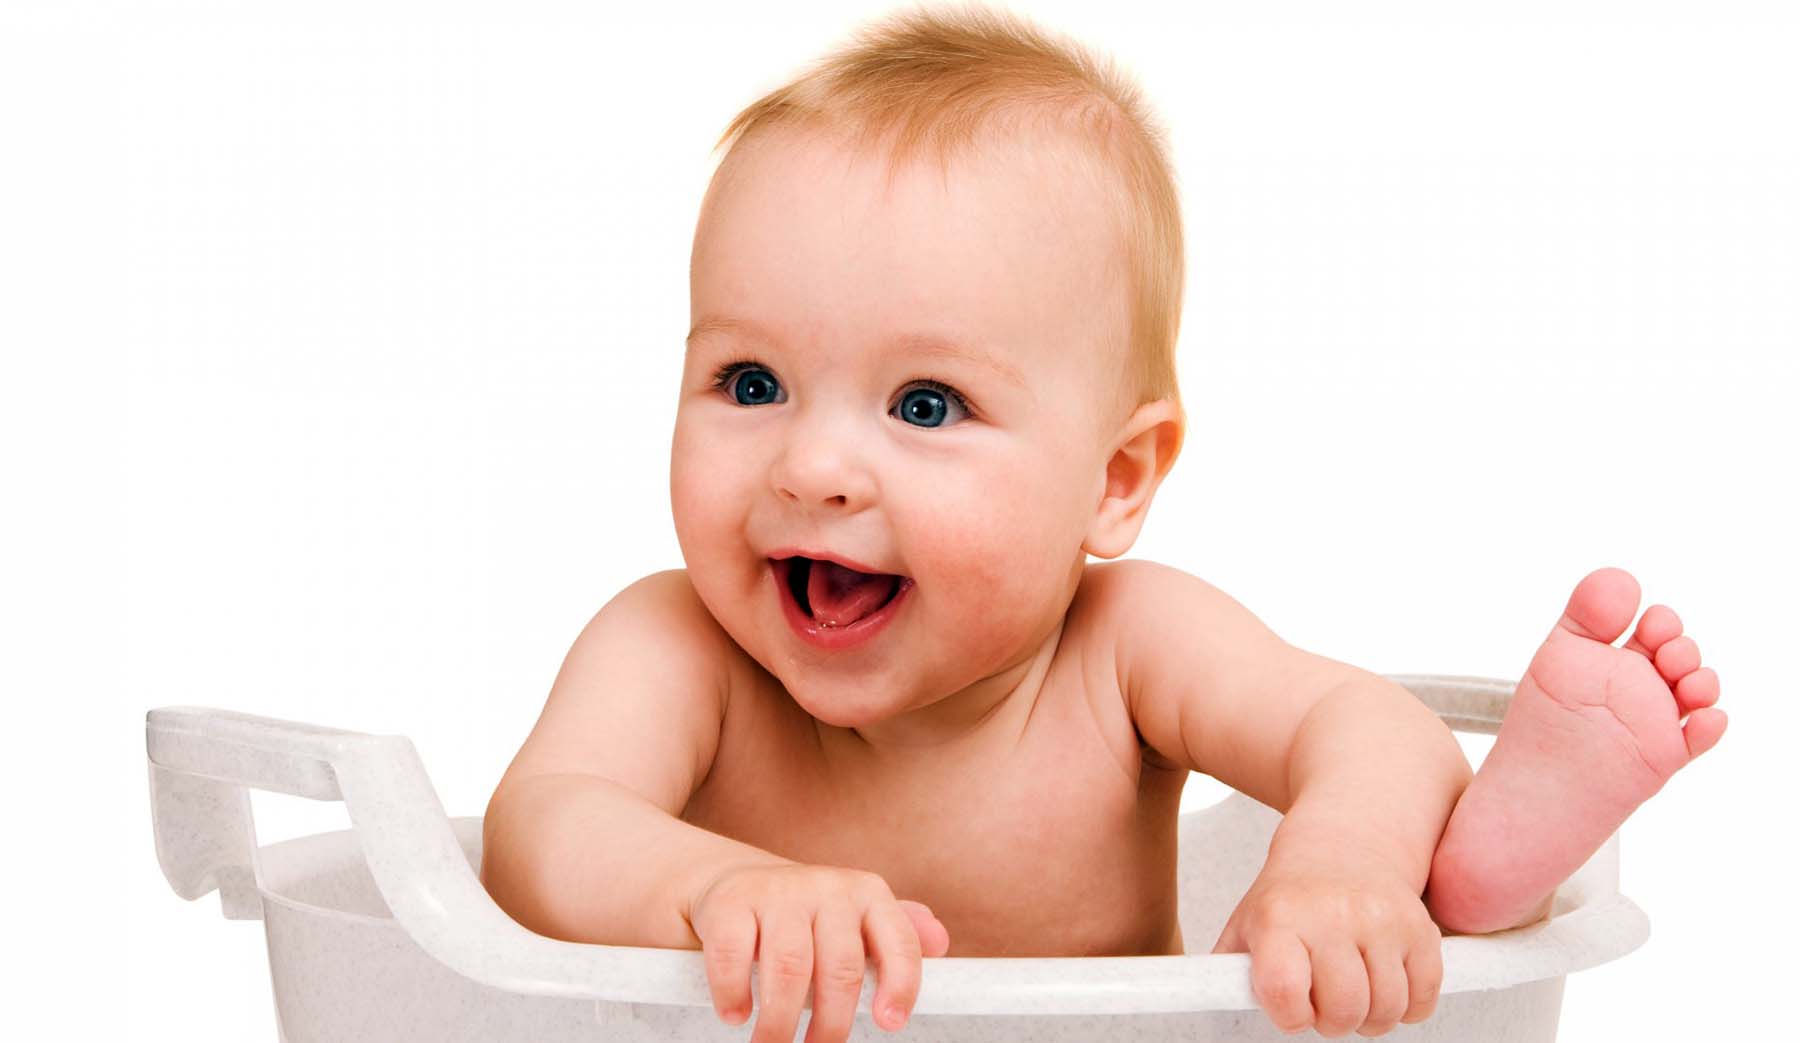 baby hd wallpapers 1080p,child,baby,facial expression,skin,product